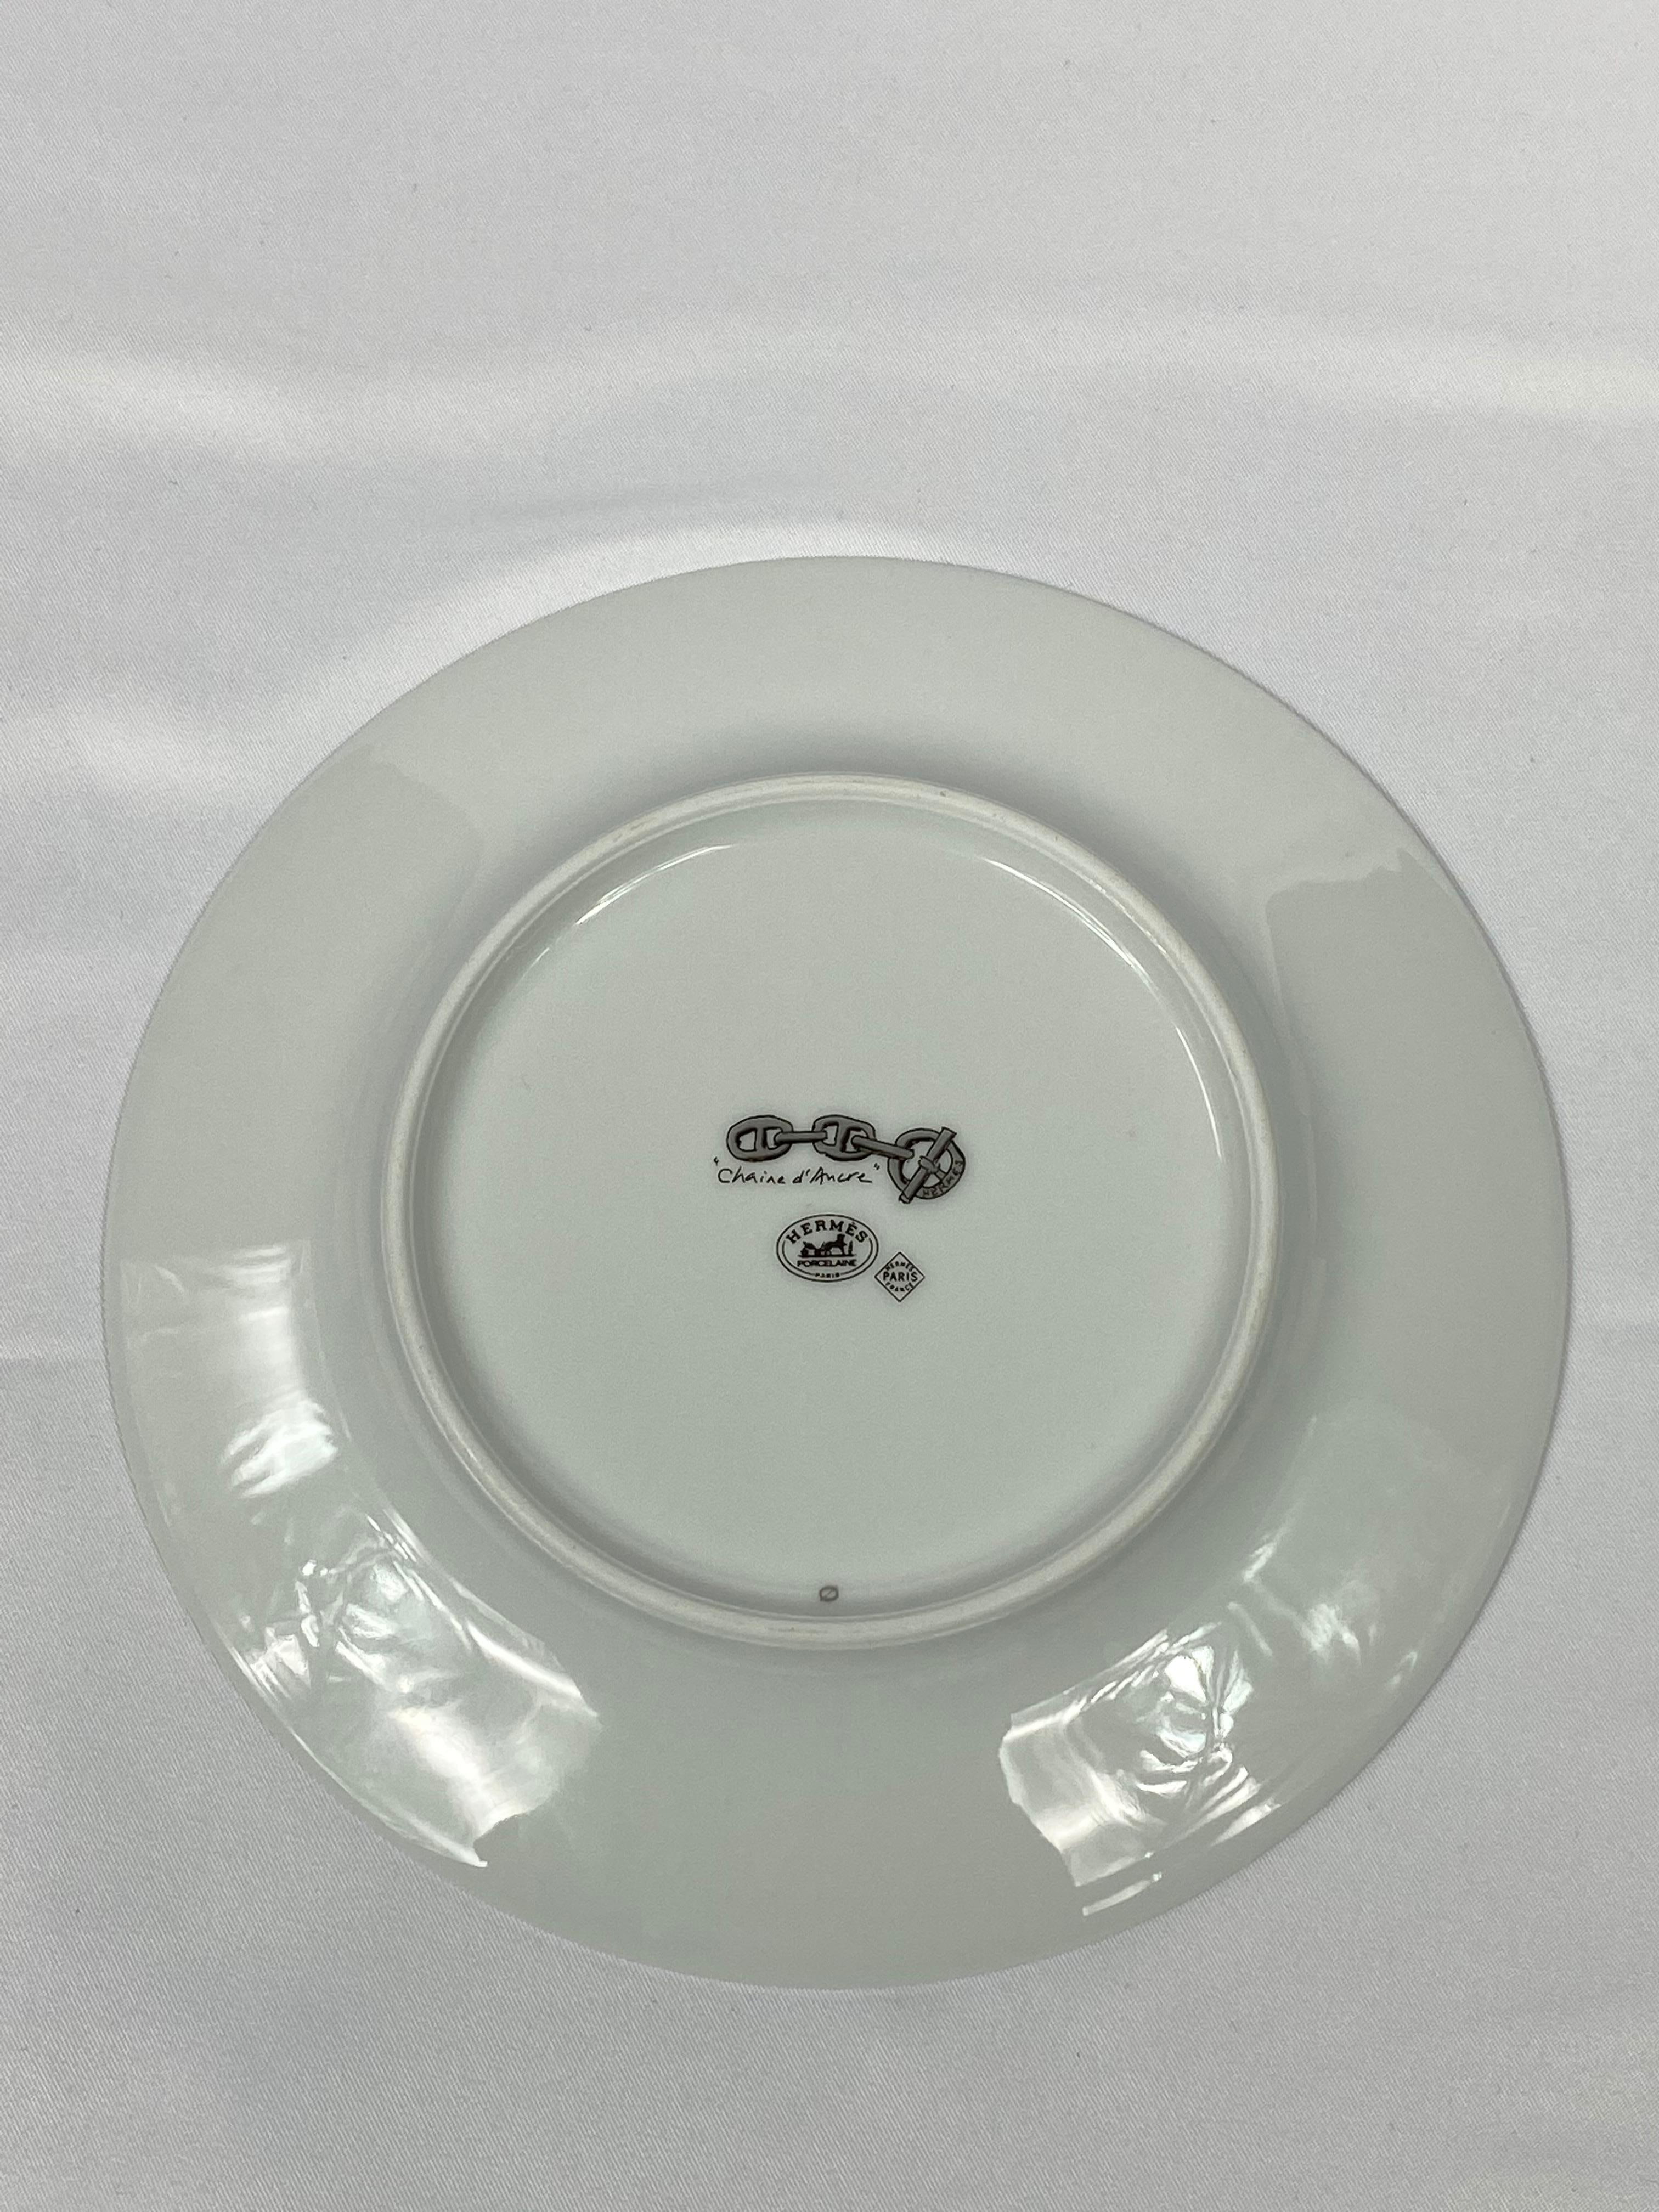 HERMES Porcelain Tea and Dessert Setting Chaine D'Ancre in Grey Set of 6 3